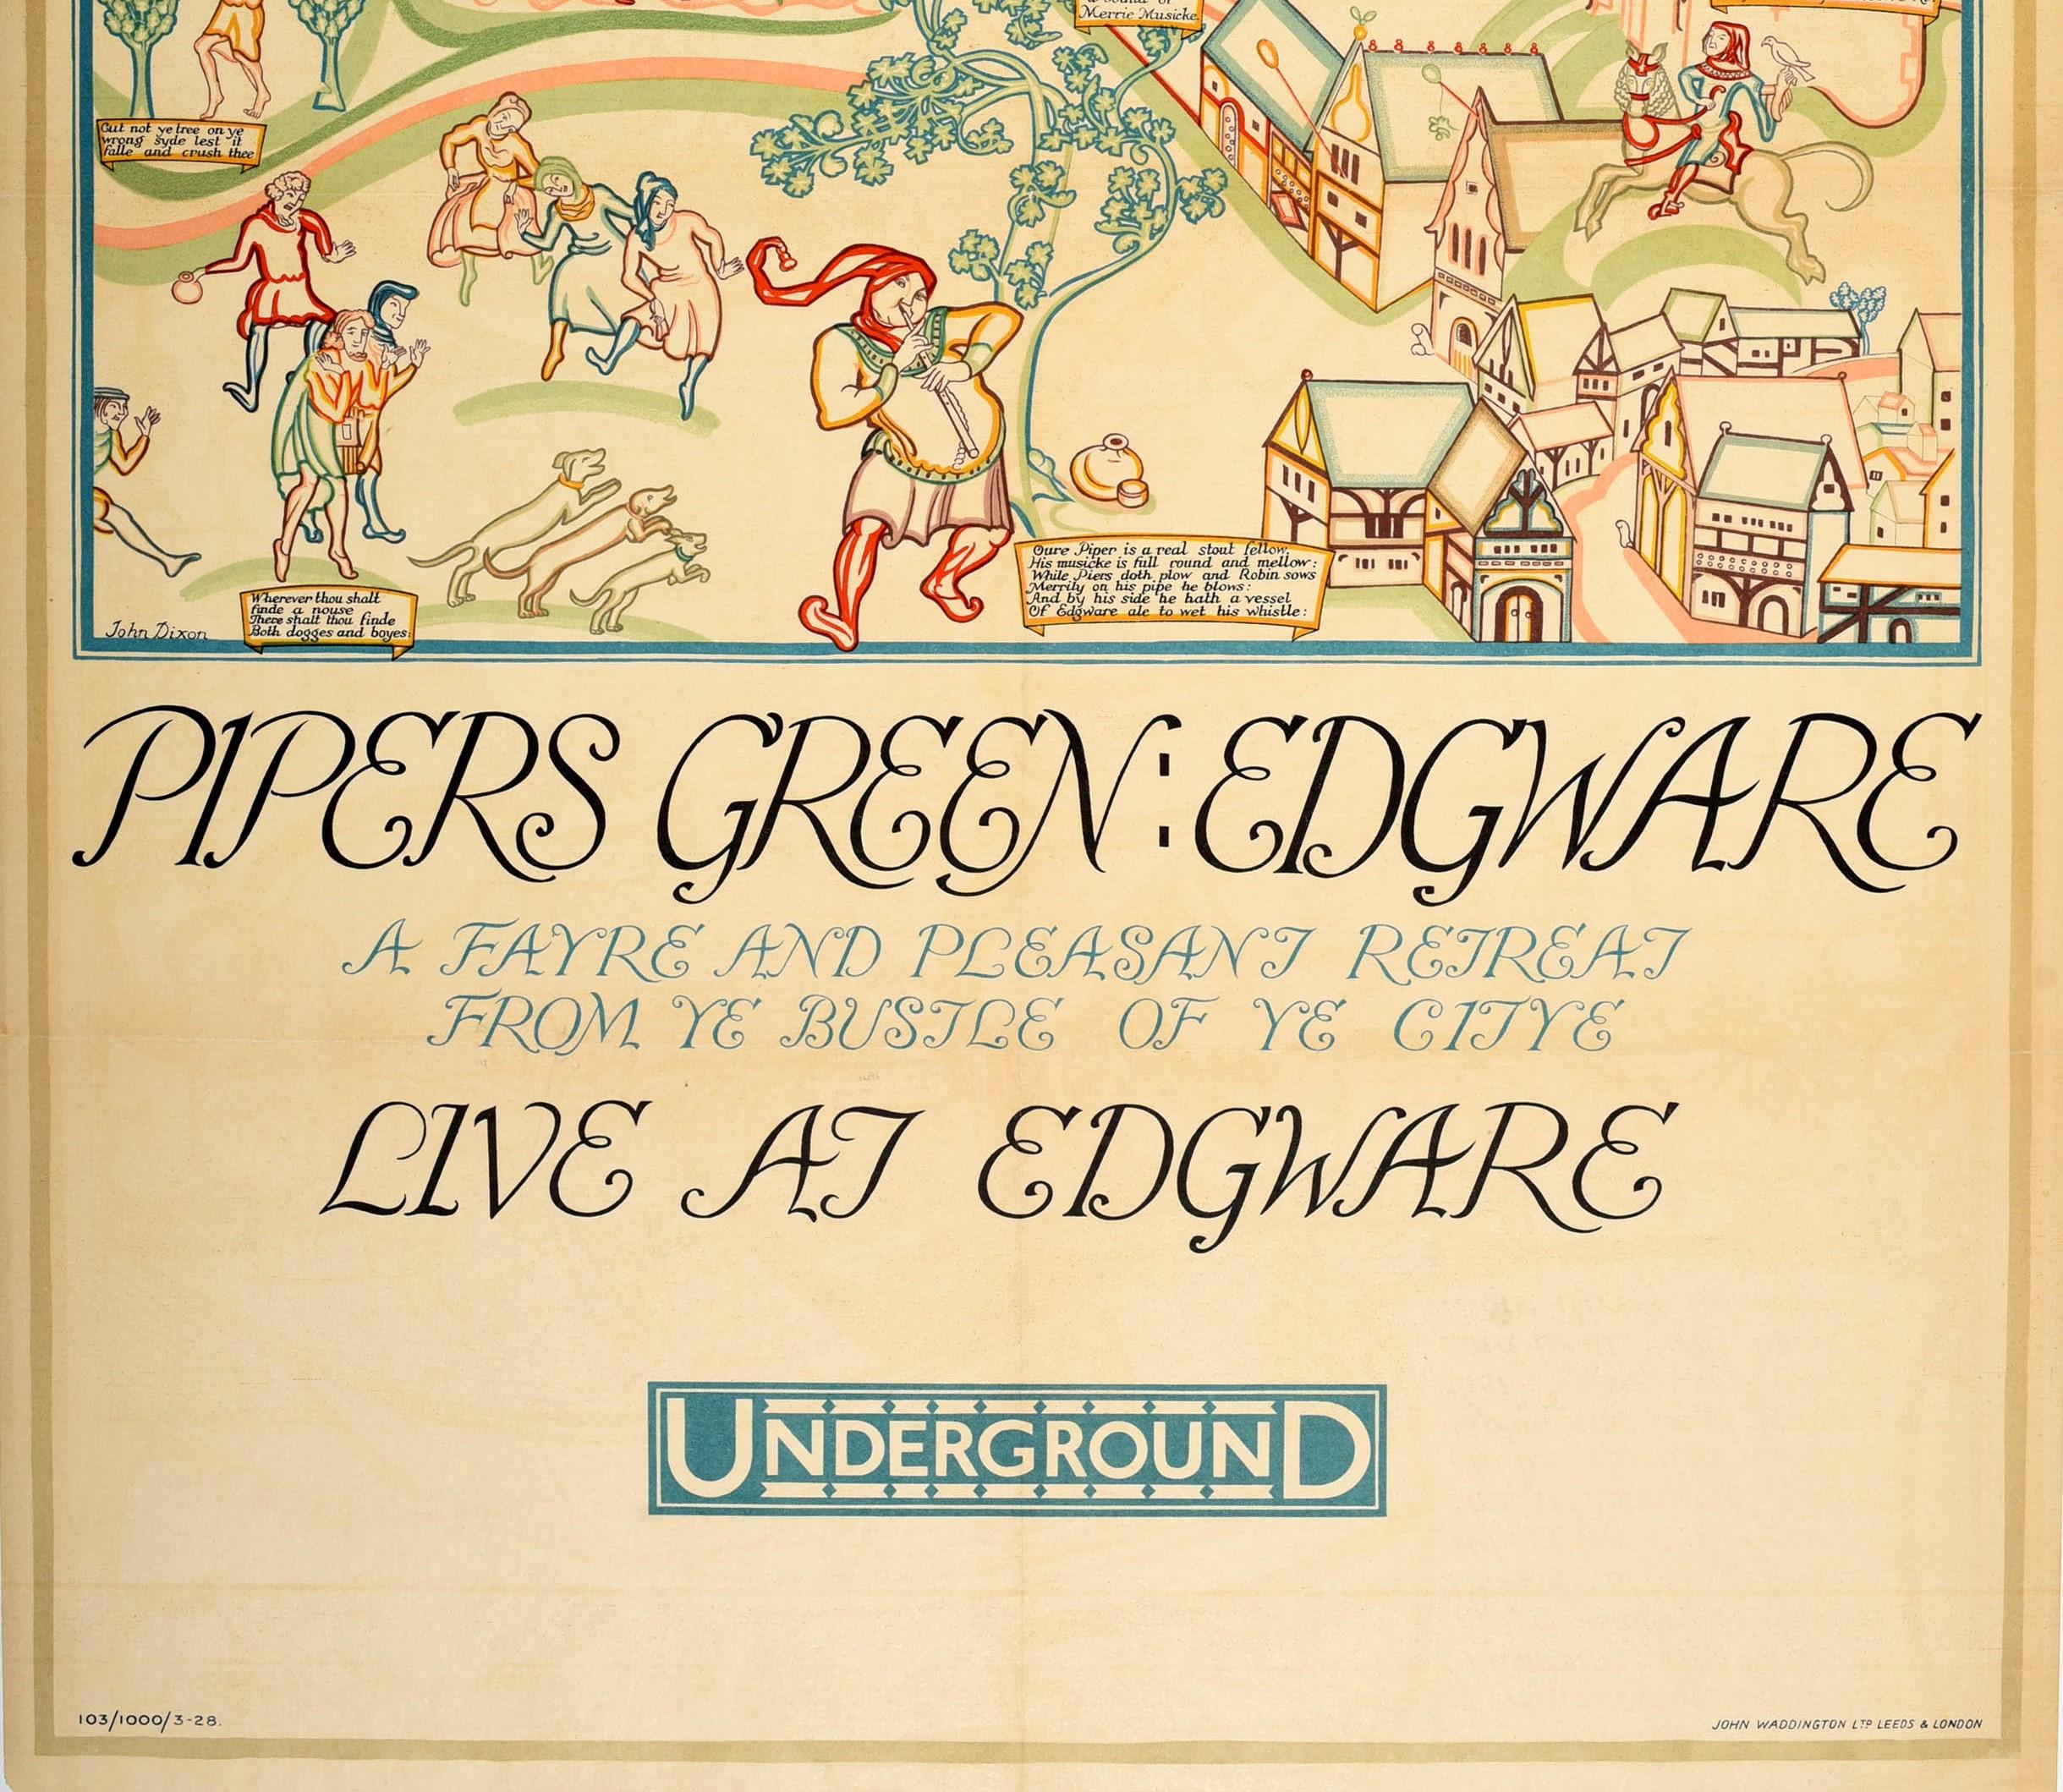 Original Vintage London Underground Poster Pipers Green Edgware Travel By Tube - Beige Print by John Dixon